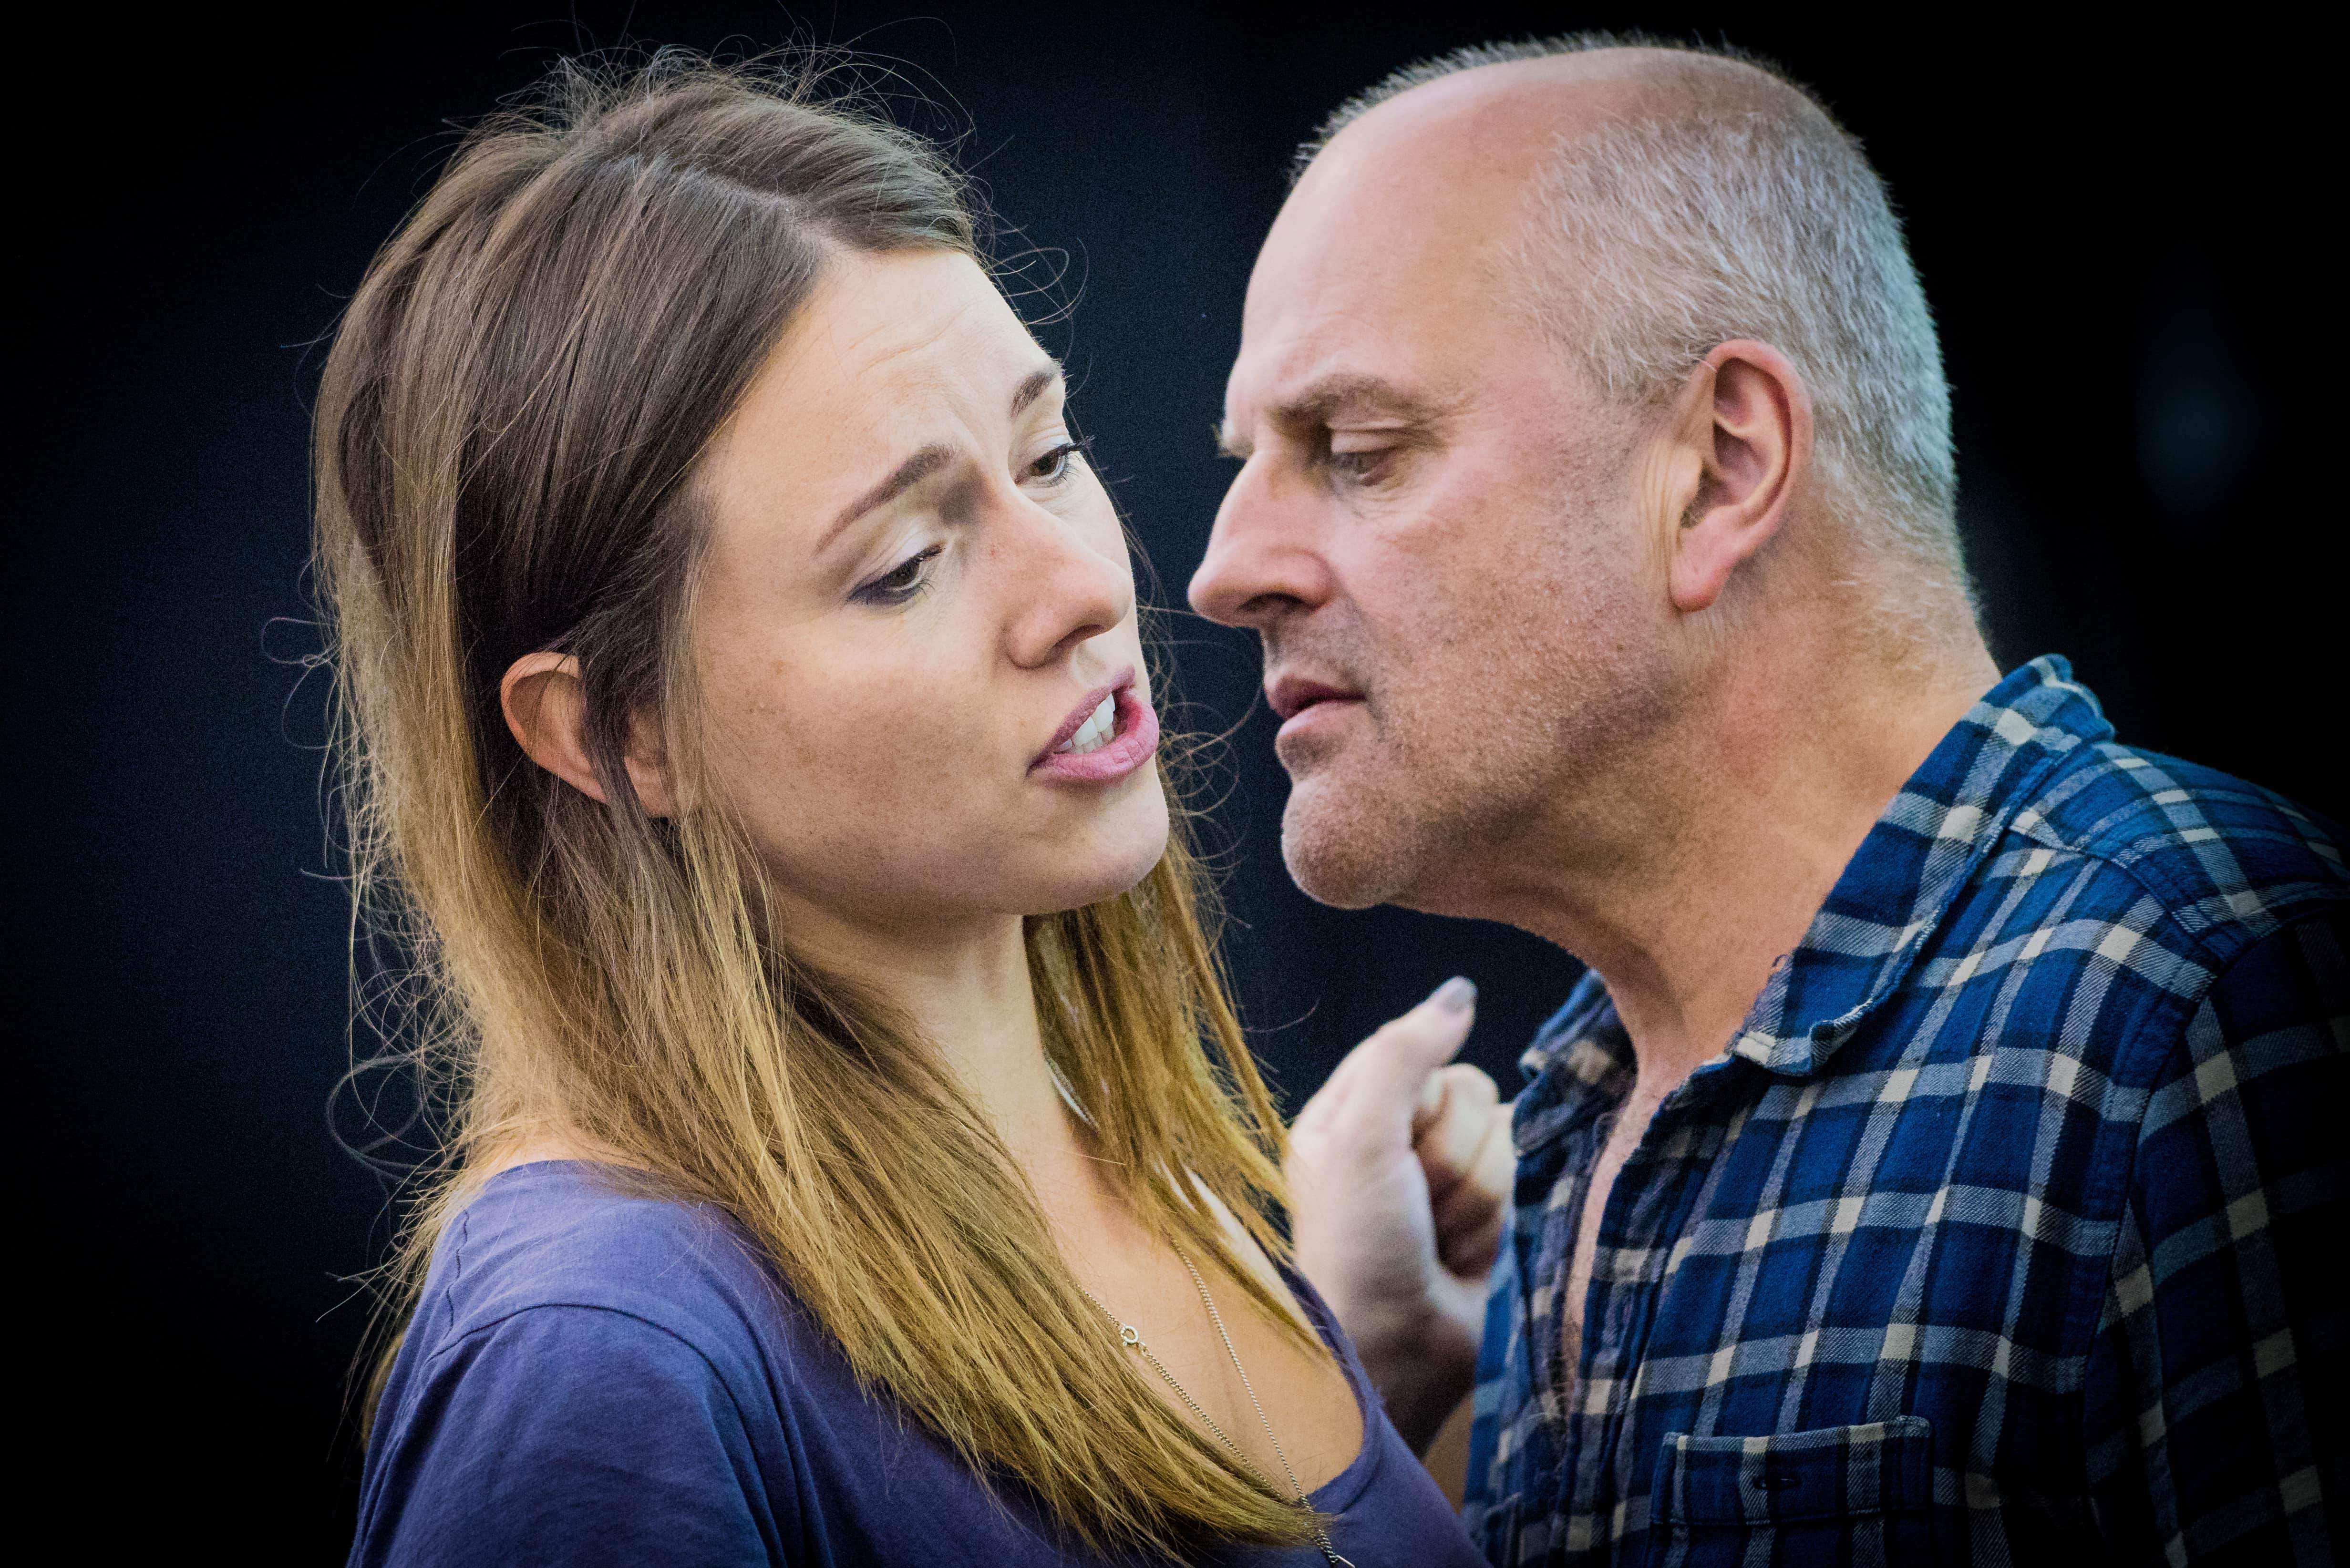 Zerlina (Mary Bevan) and Don Giovanni (Christopher Purves) in rehearsal.